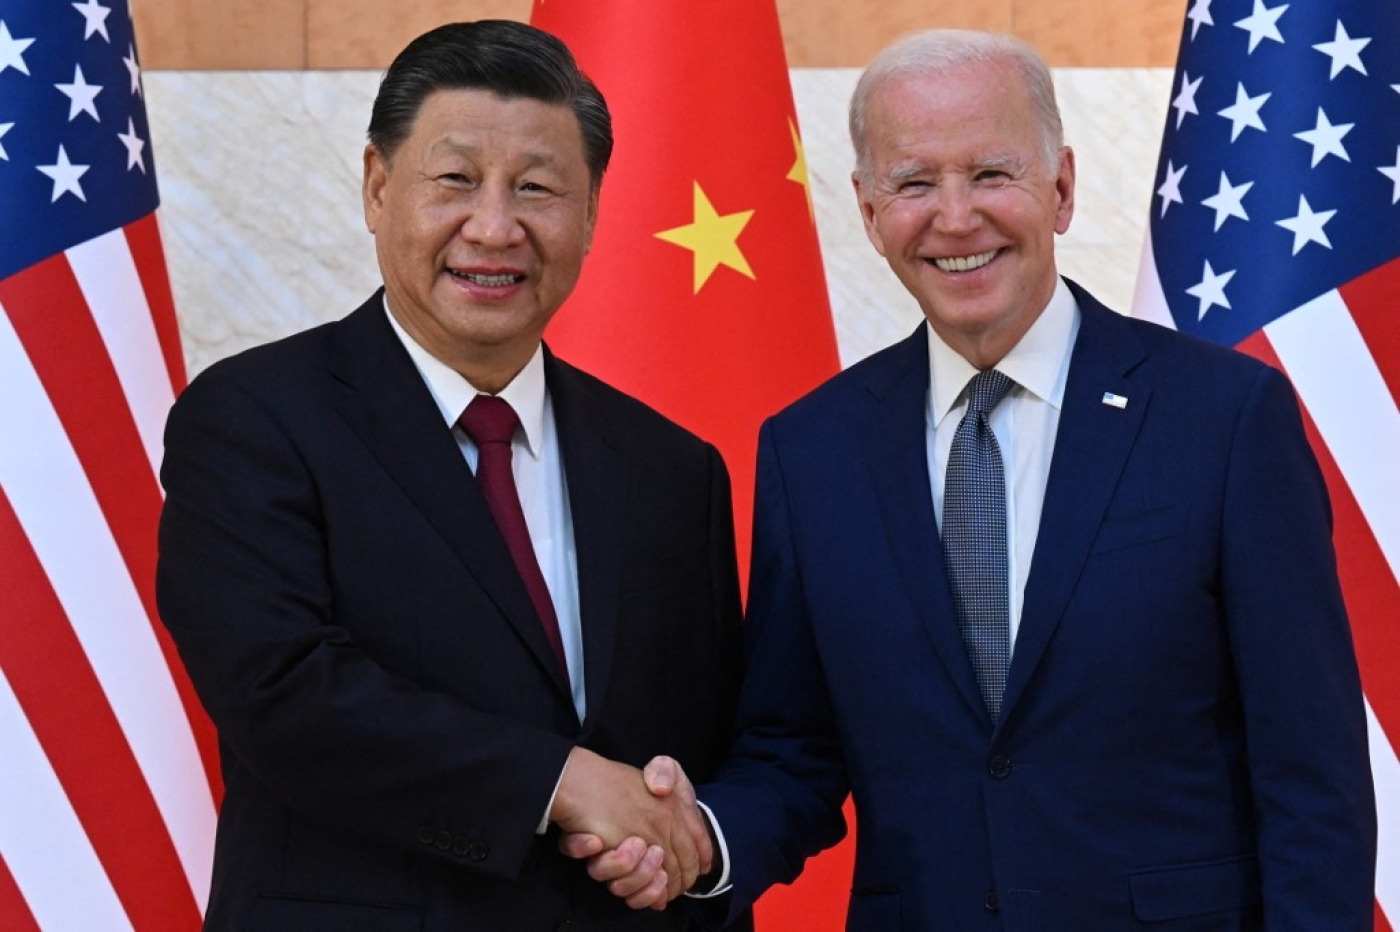 US President Joe Biden (R) and China's President Xi Jinping (L) meet at the G20 Summit on the Indonesian island of Bali on 14 November 2022 (AFP)